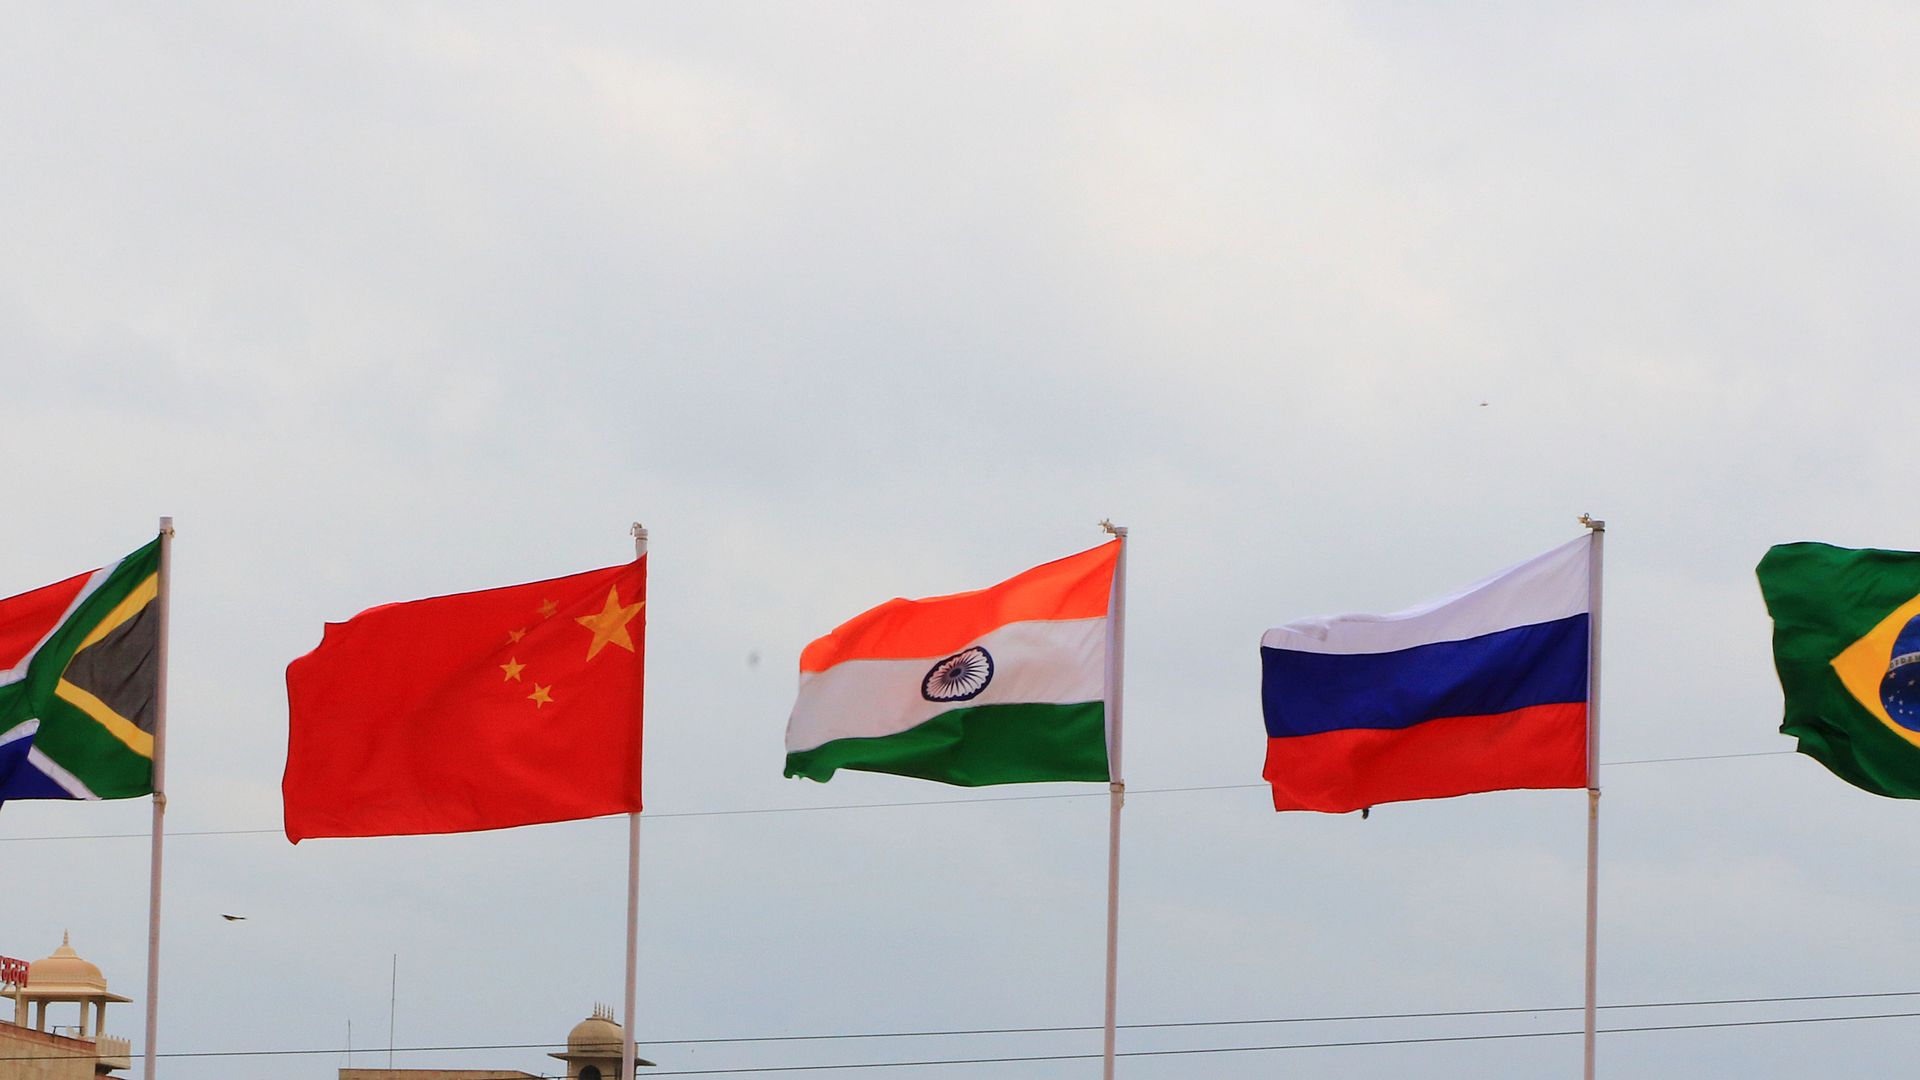 The BRICS summit is over and the inclusion of six new countries almost guarantees the bloc will not accomplish anything meaningful.